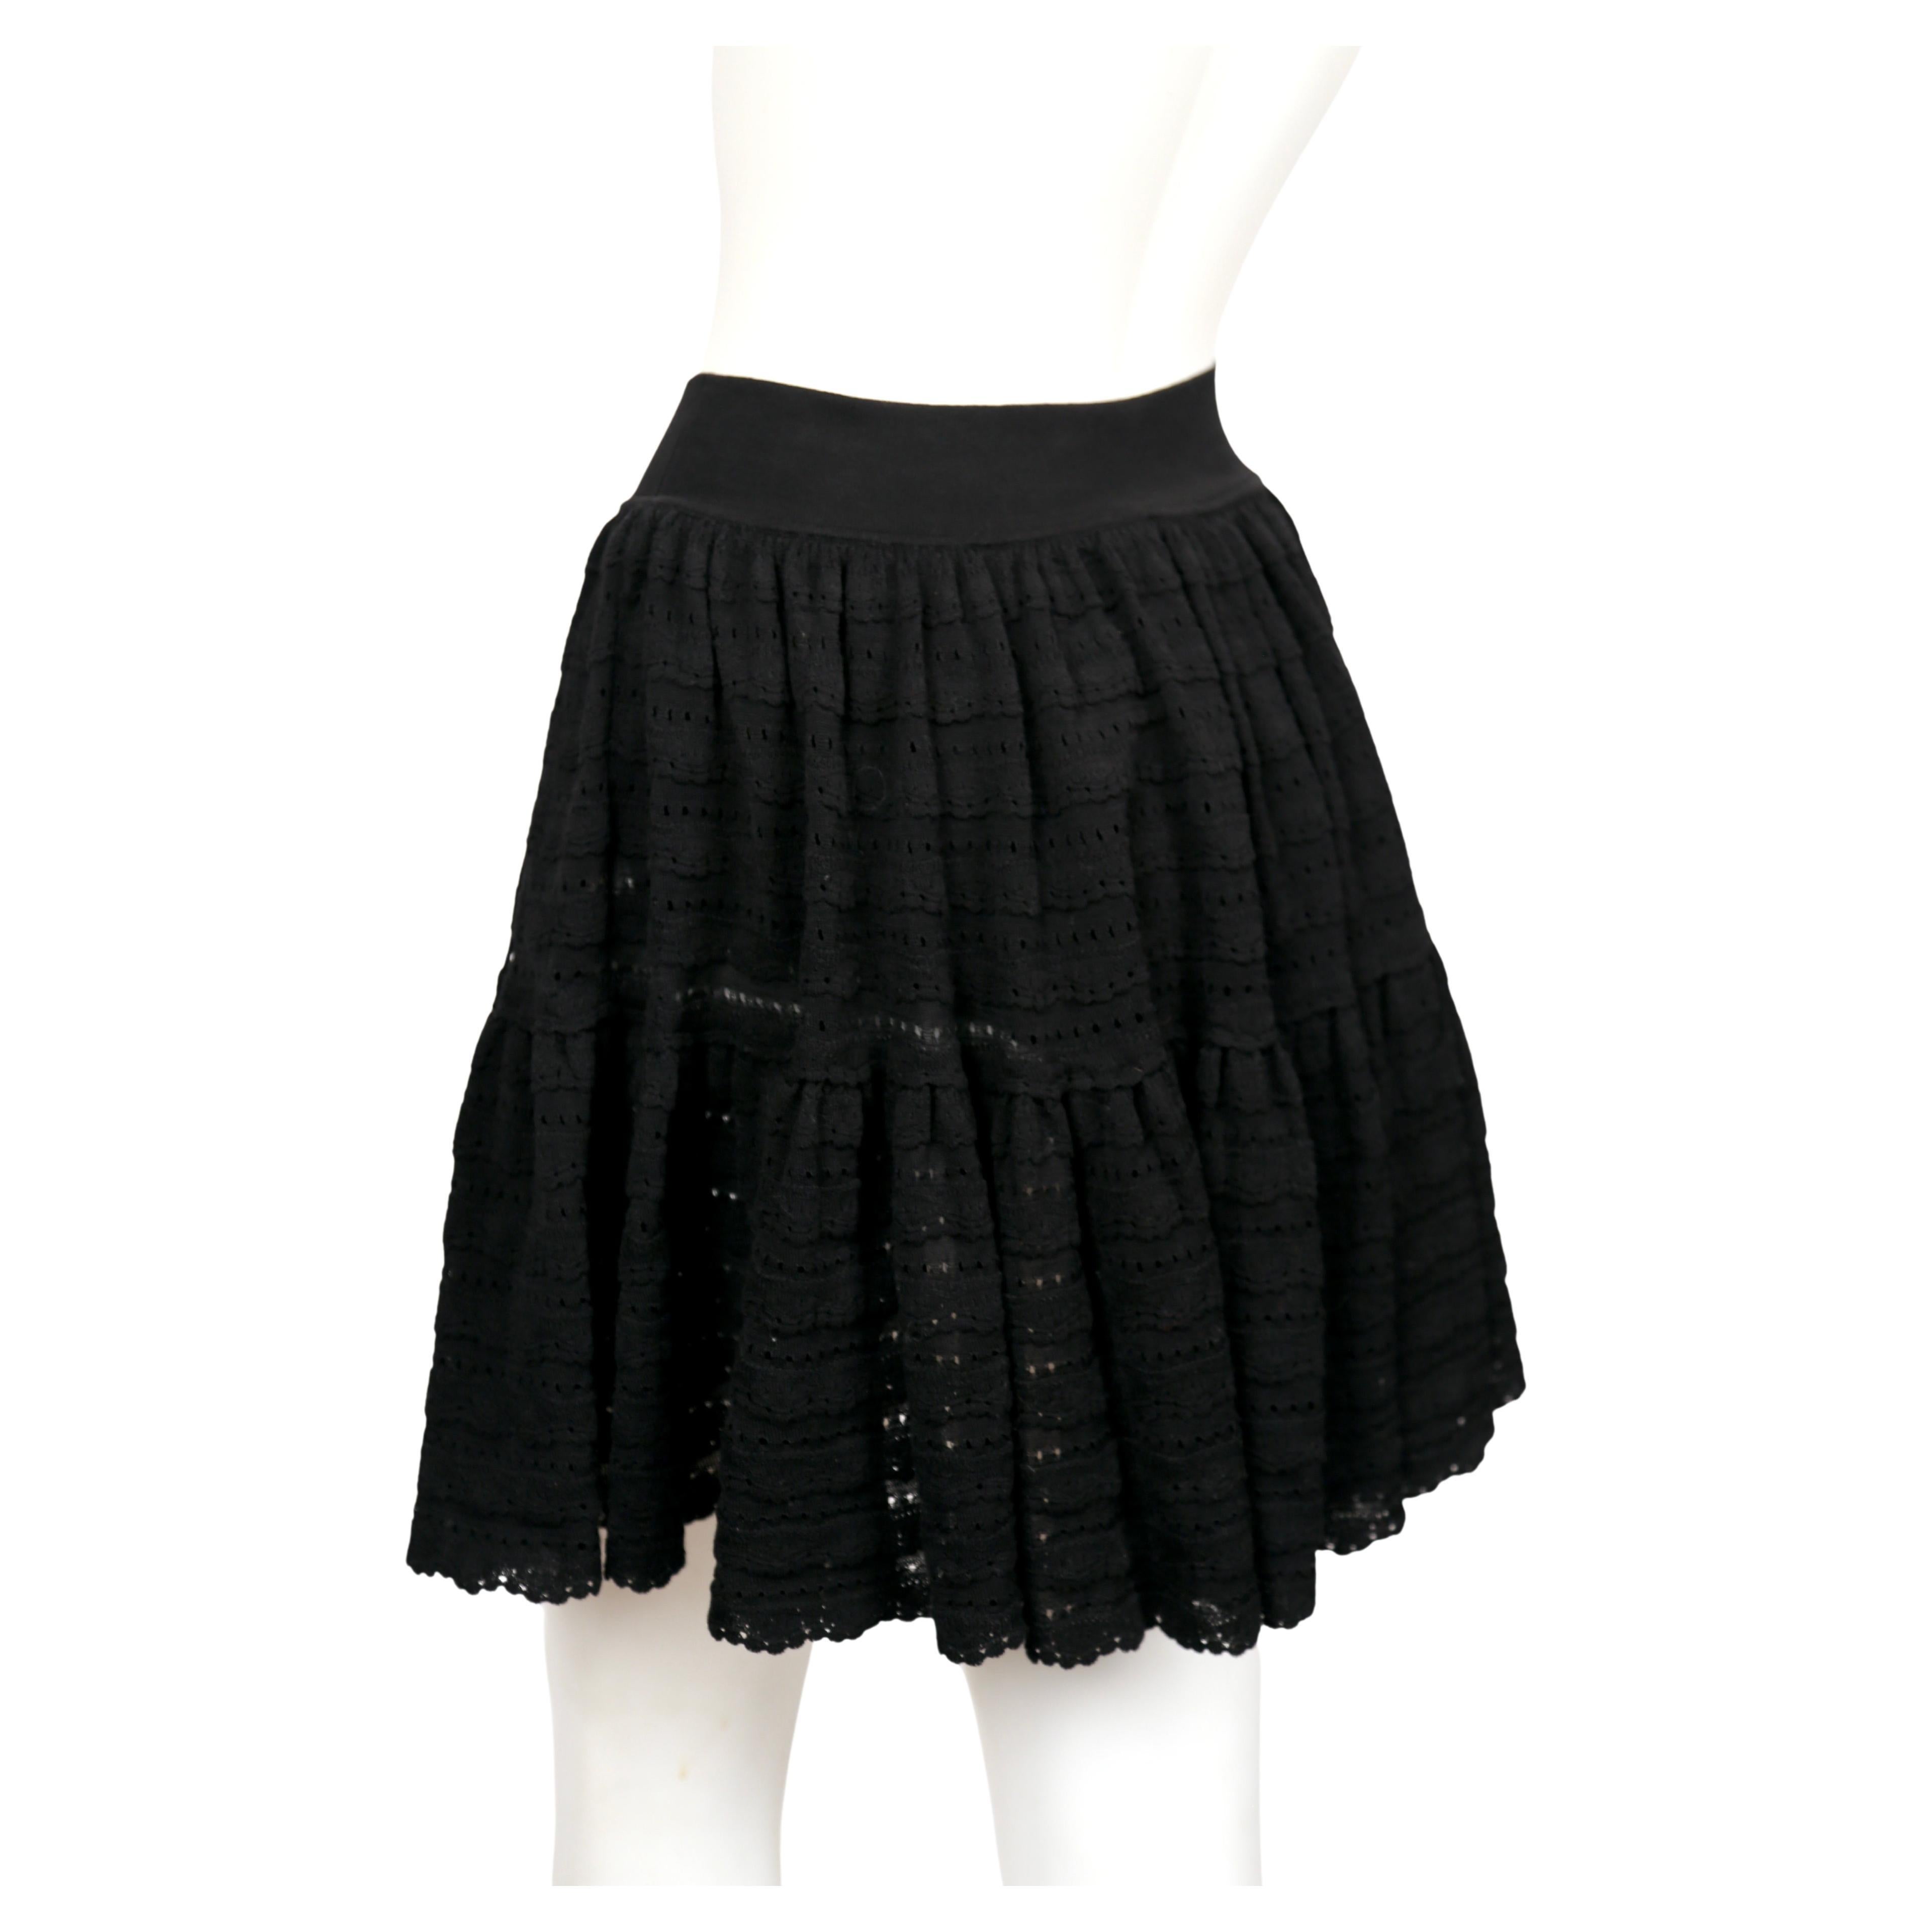 2000's AZZEDINE ALAIA black pointelle knit skirt with ruffles & hidden shorts For Sale 1